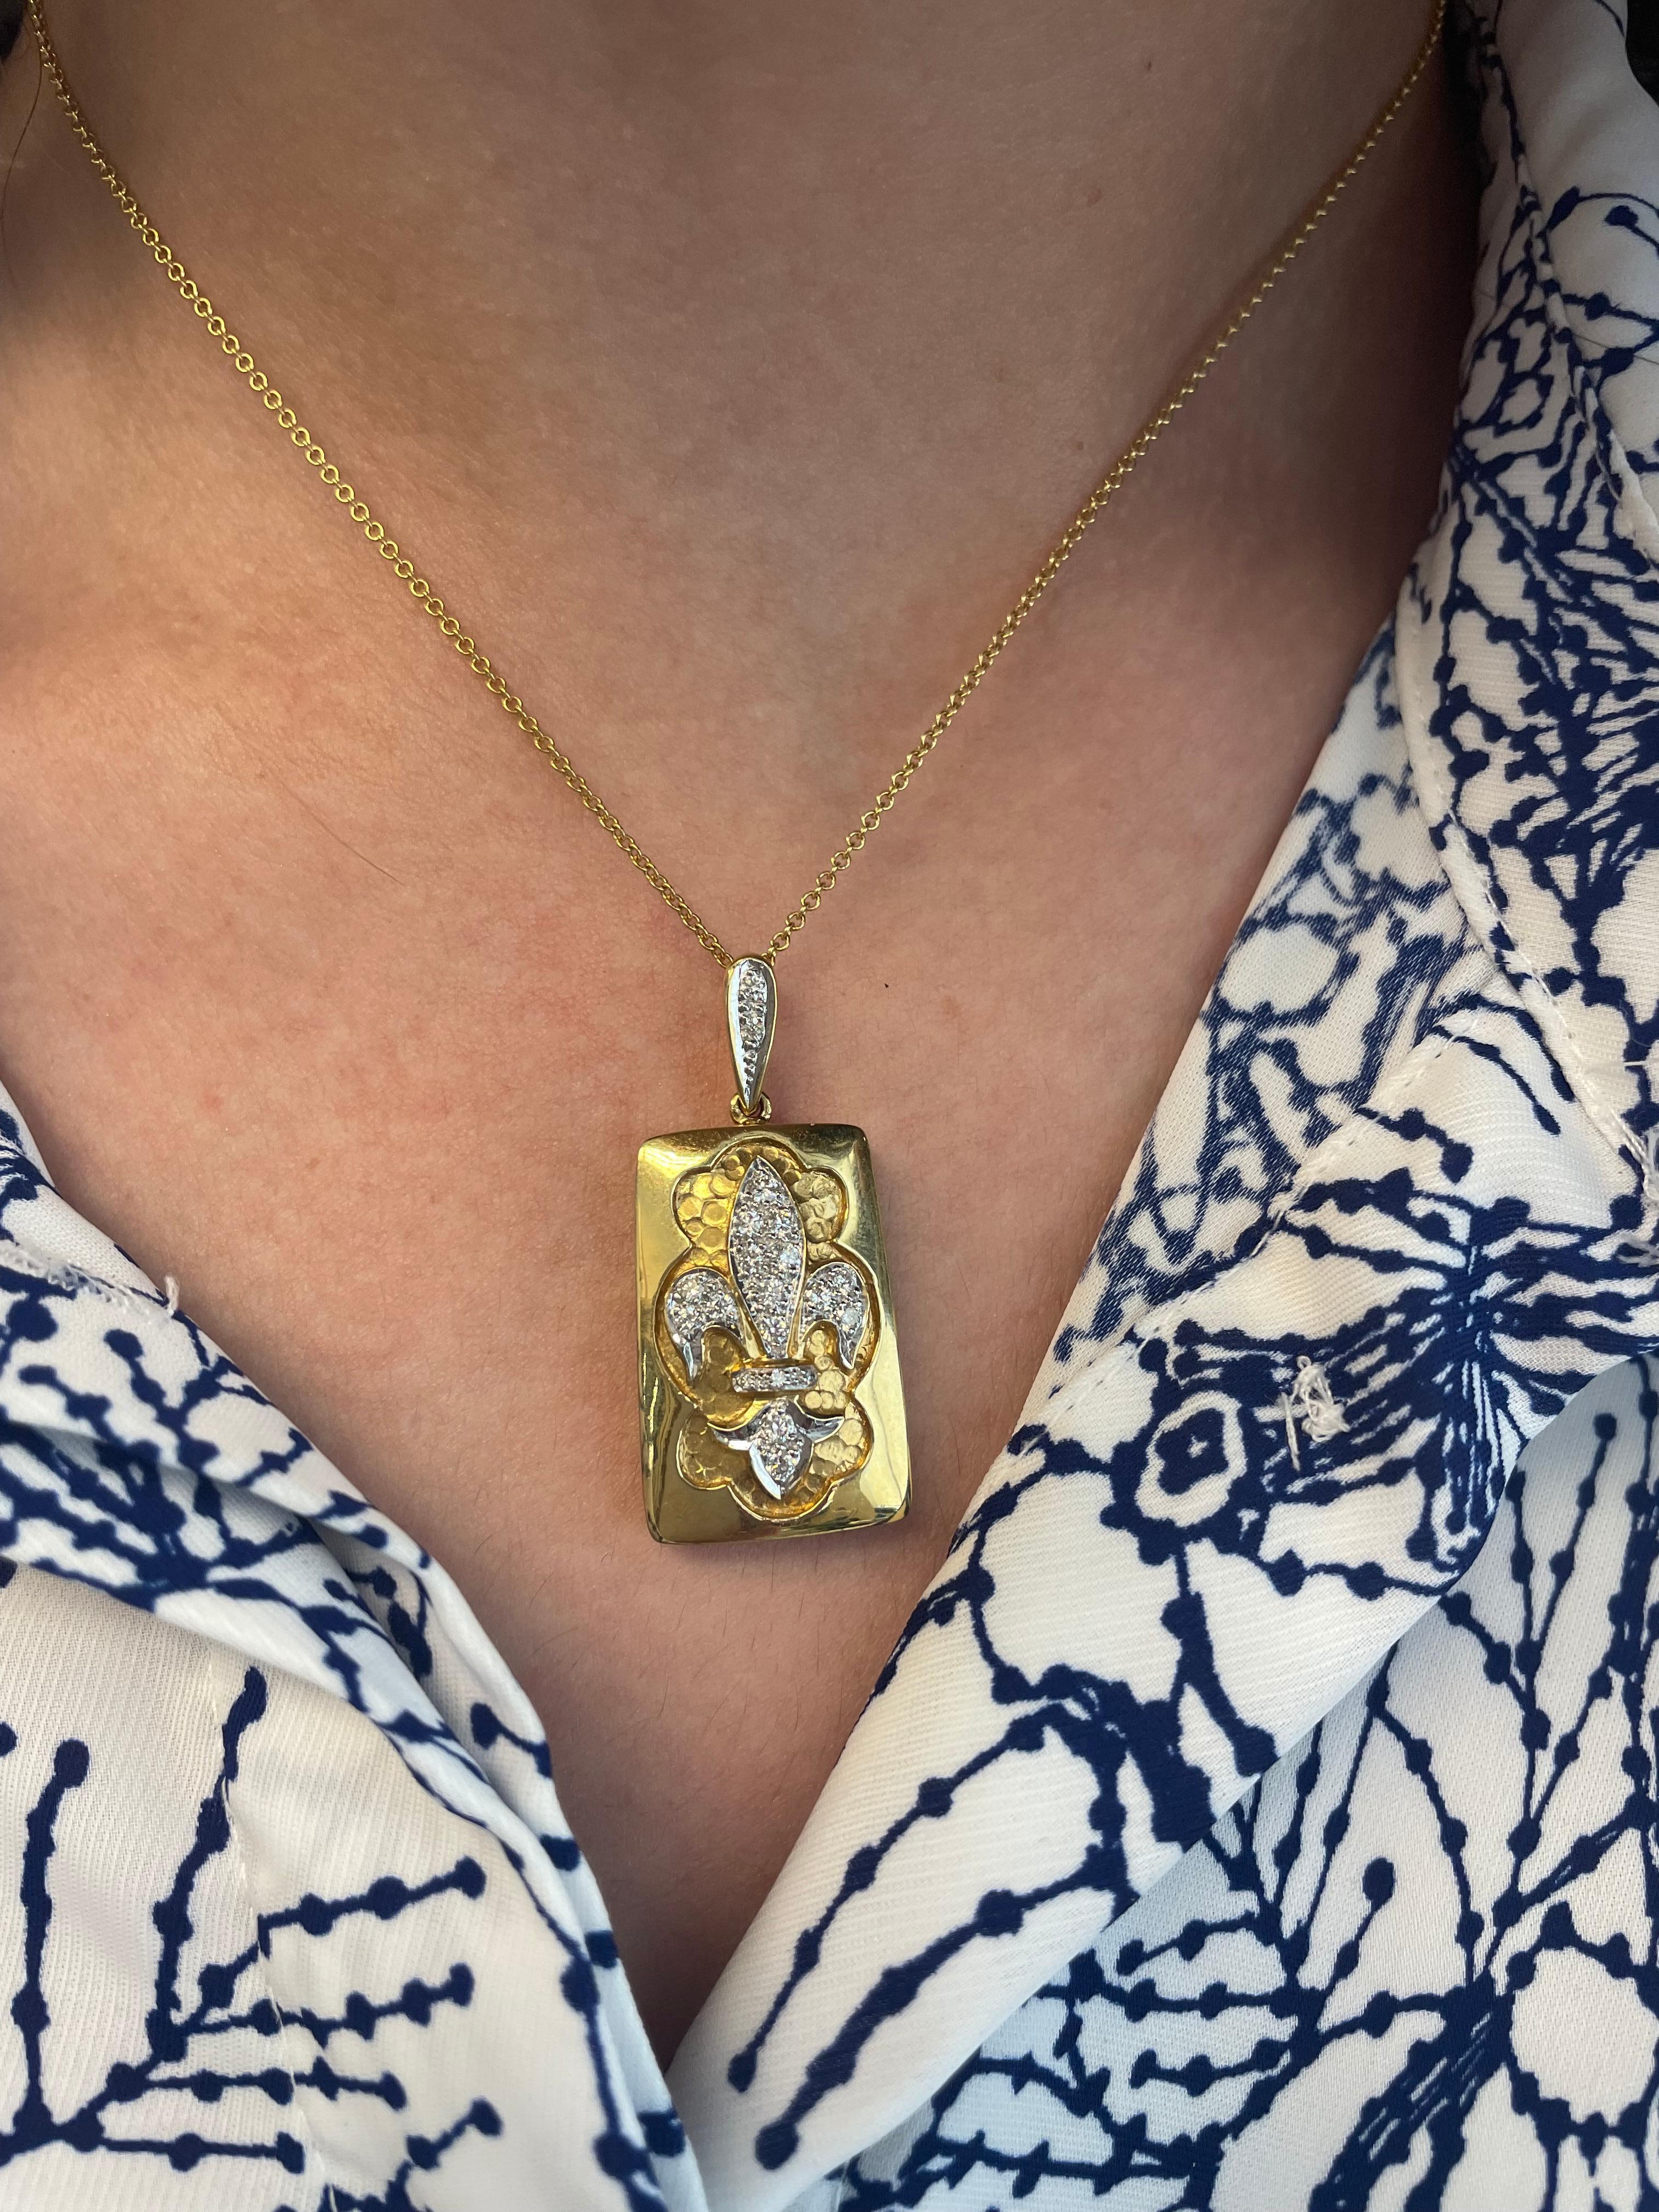 Fleur De Lis design diamond pendant necklace. 
0.40 carats of round brilliant diamonds, approximately G/H color and SI clarity. 18-karat yellow gold.
Accommodated with an up to date appraisal by a GIA G.G. upon request. Please contact us with any